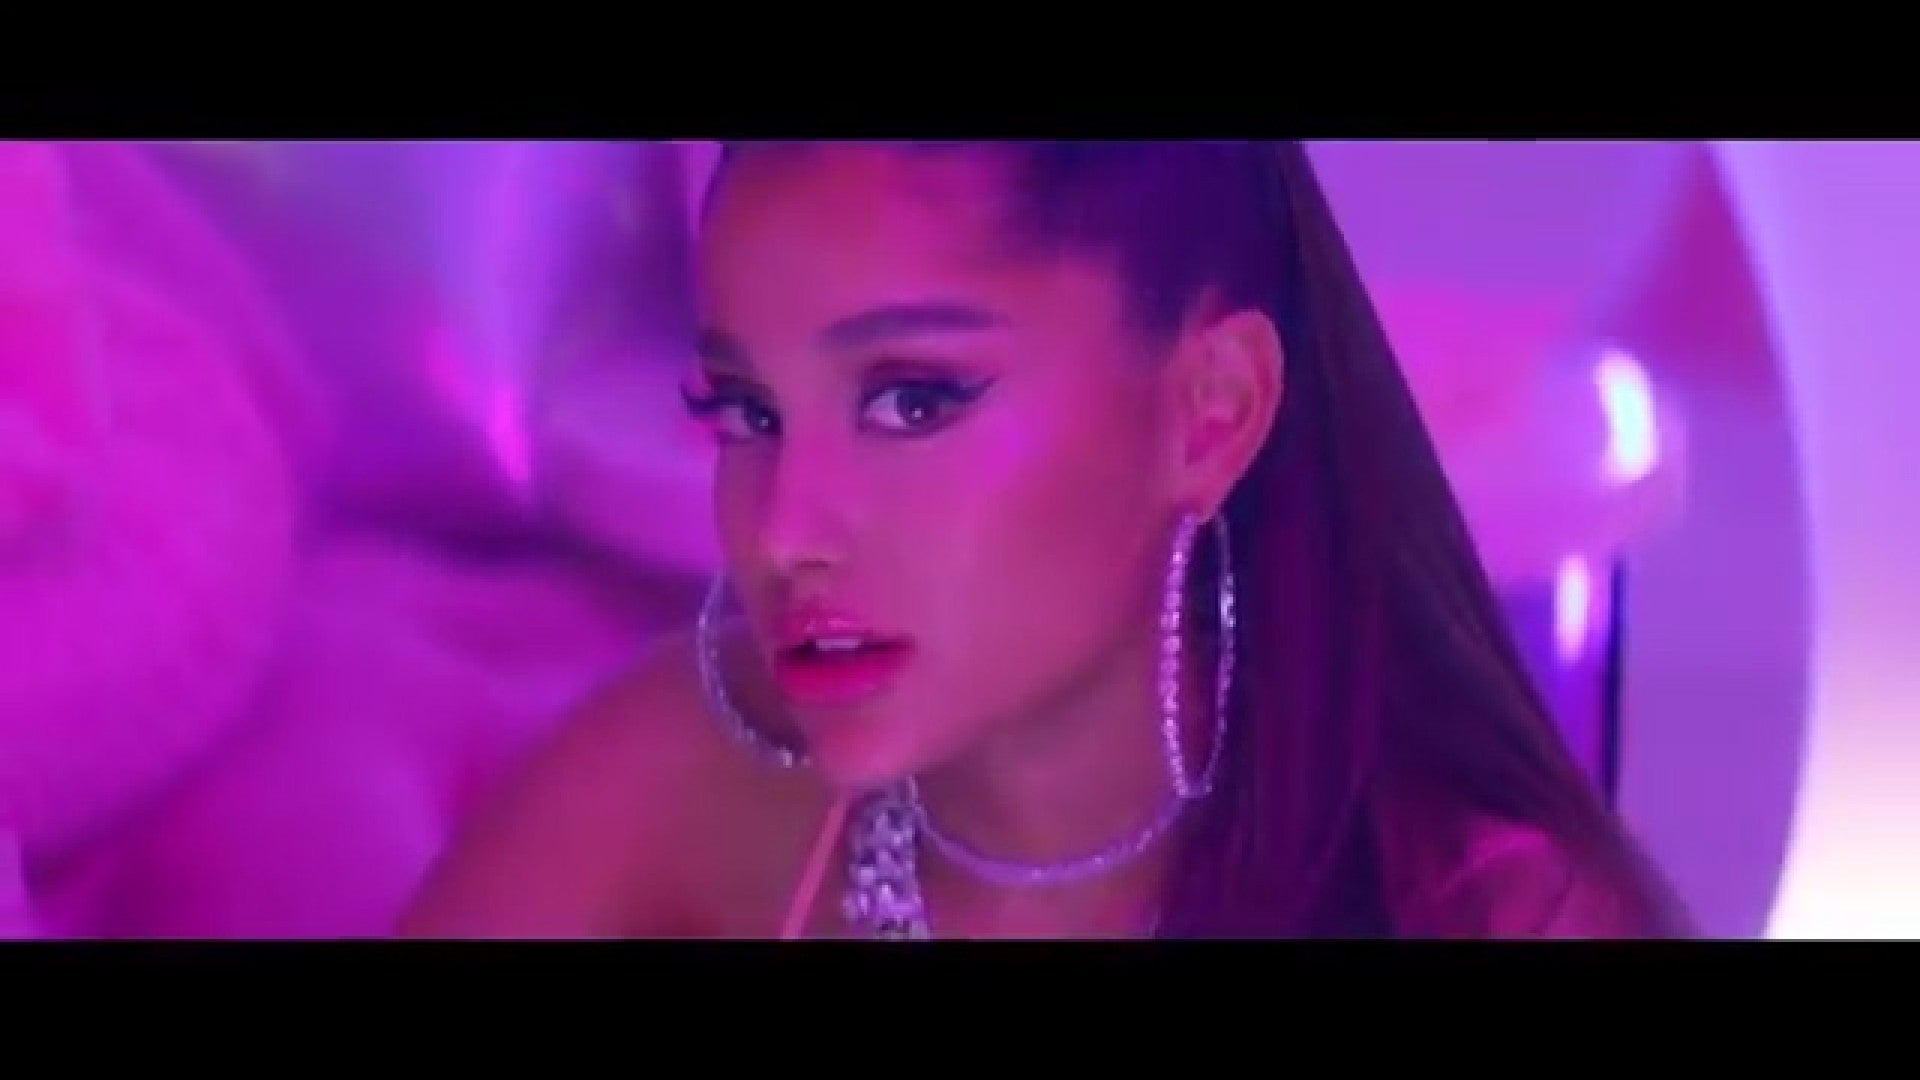 Porn Ariana Grande Butt - Ariana Grande's '7 Rings': Details You Might Have Missed